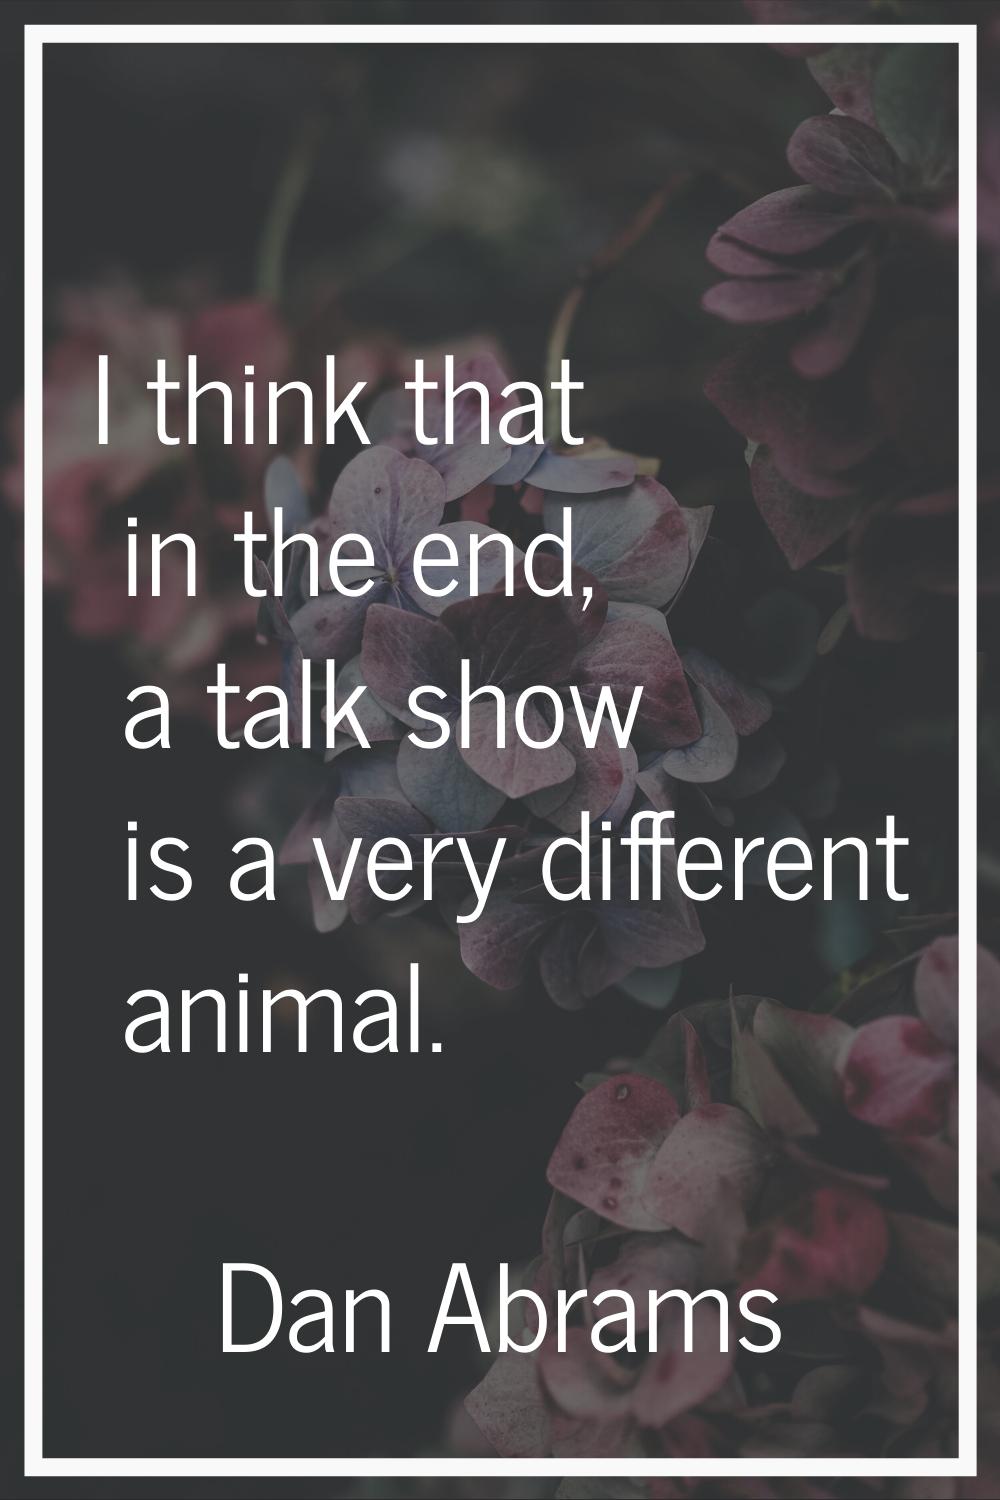 I think that in the end, a talk show is a very different animal.